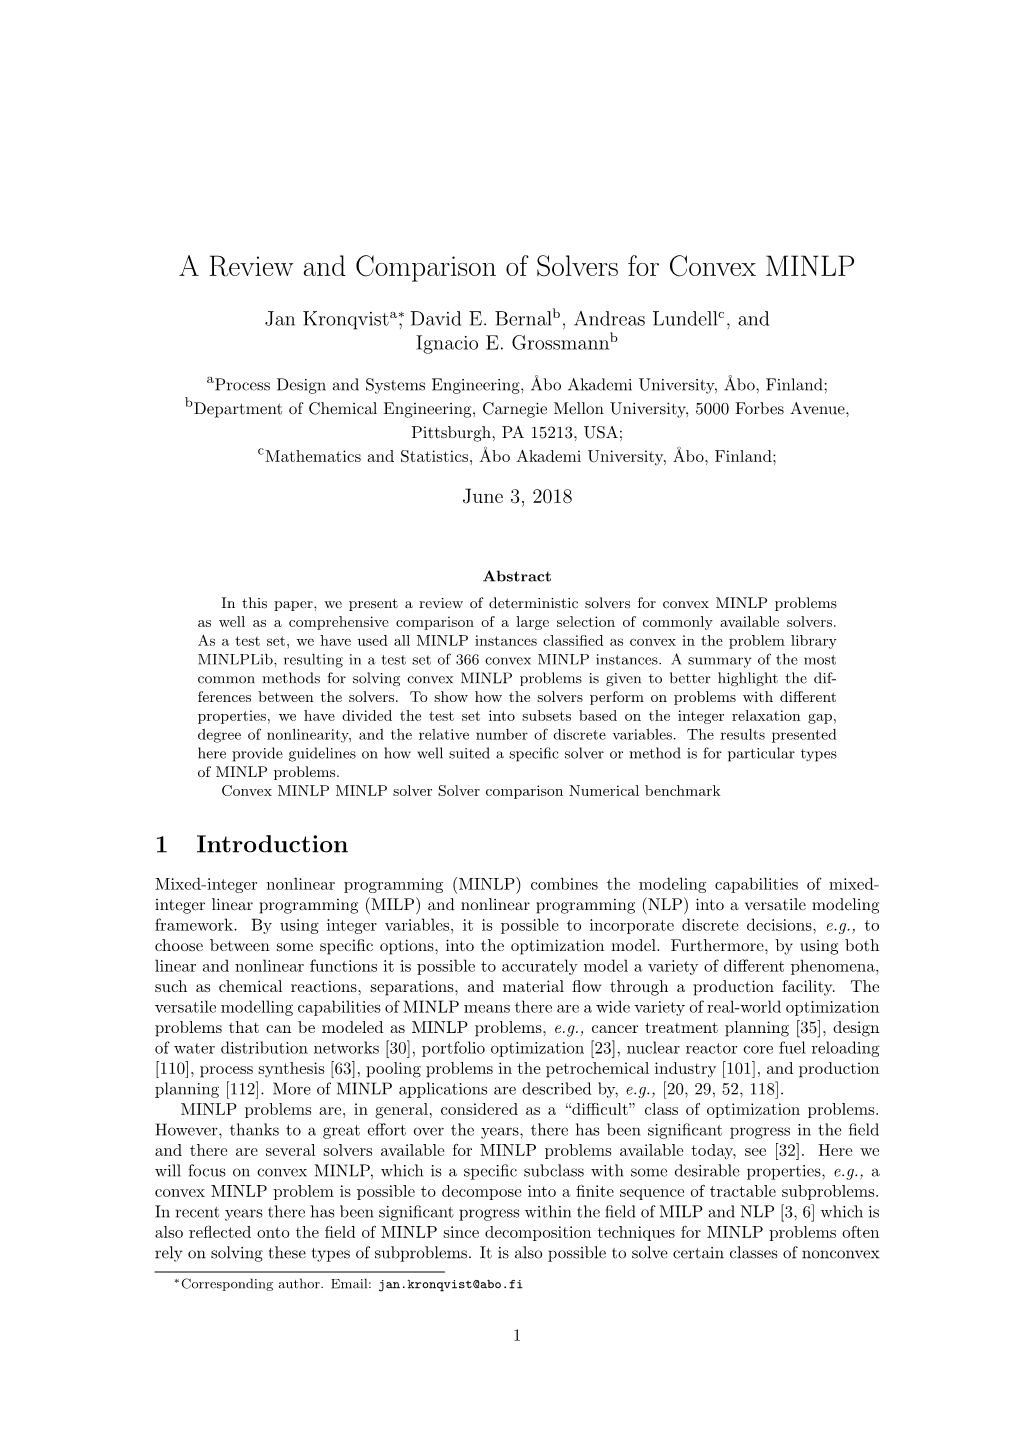 A Review and Comparison of Solvers for Convex MINLP